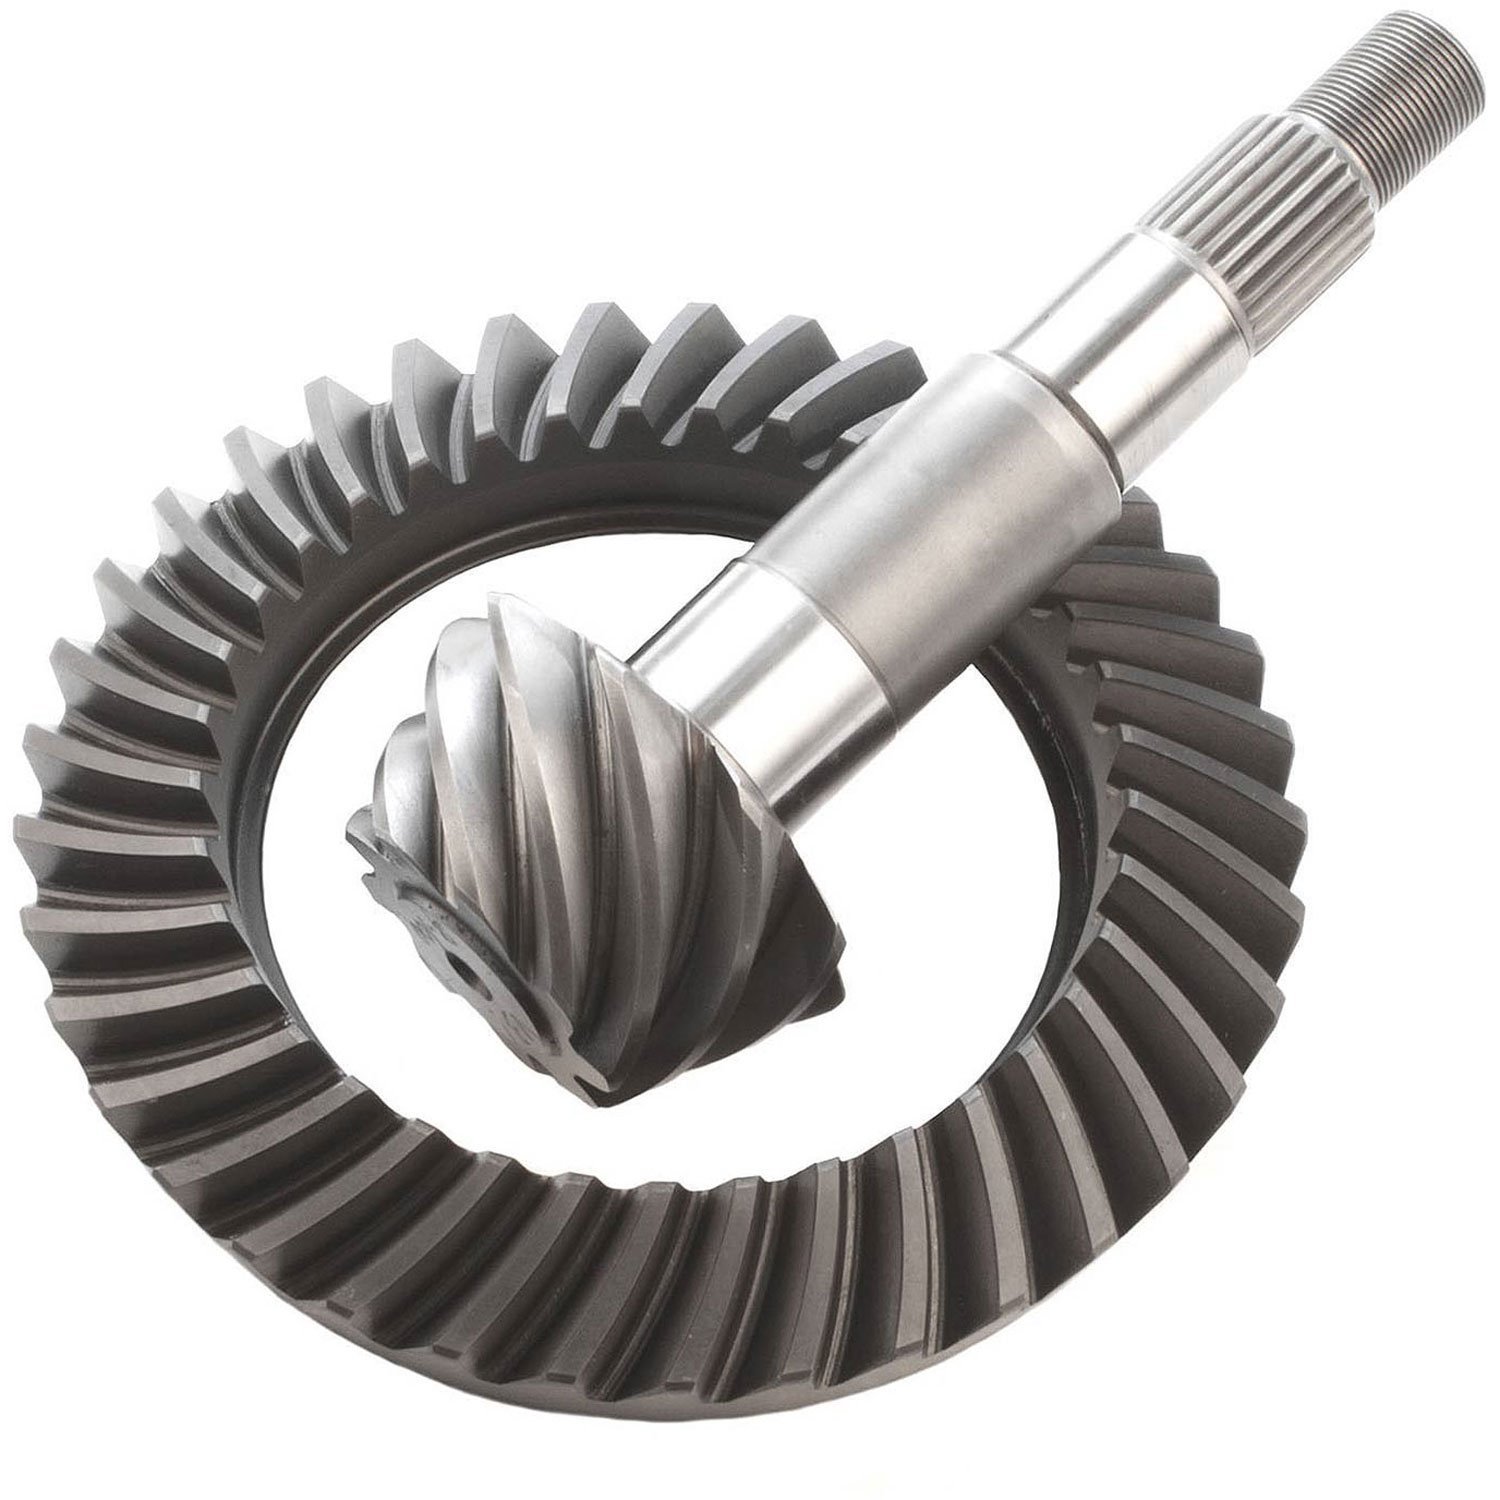 41-9 Teeth Performance Ring and Pinion Differential Set D35-456 4.56 Ratio Dana 35 Standard Motive Gear